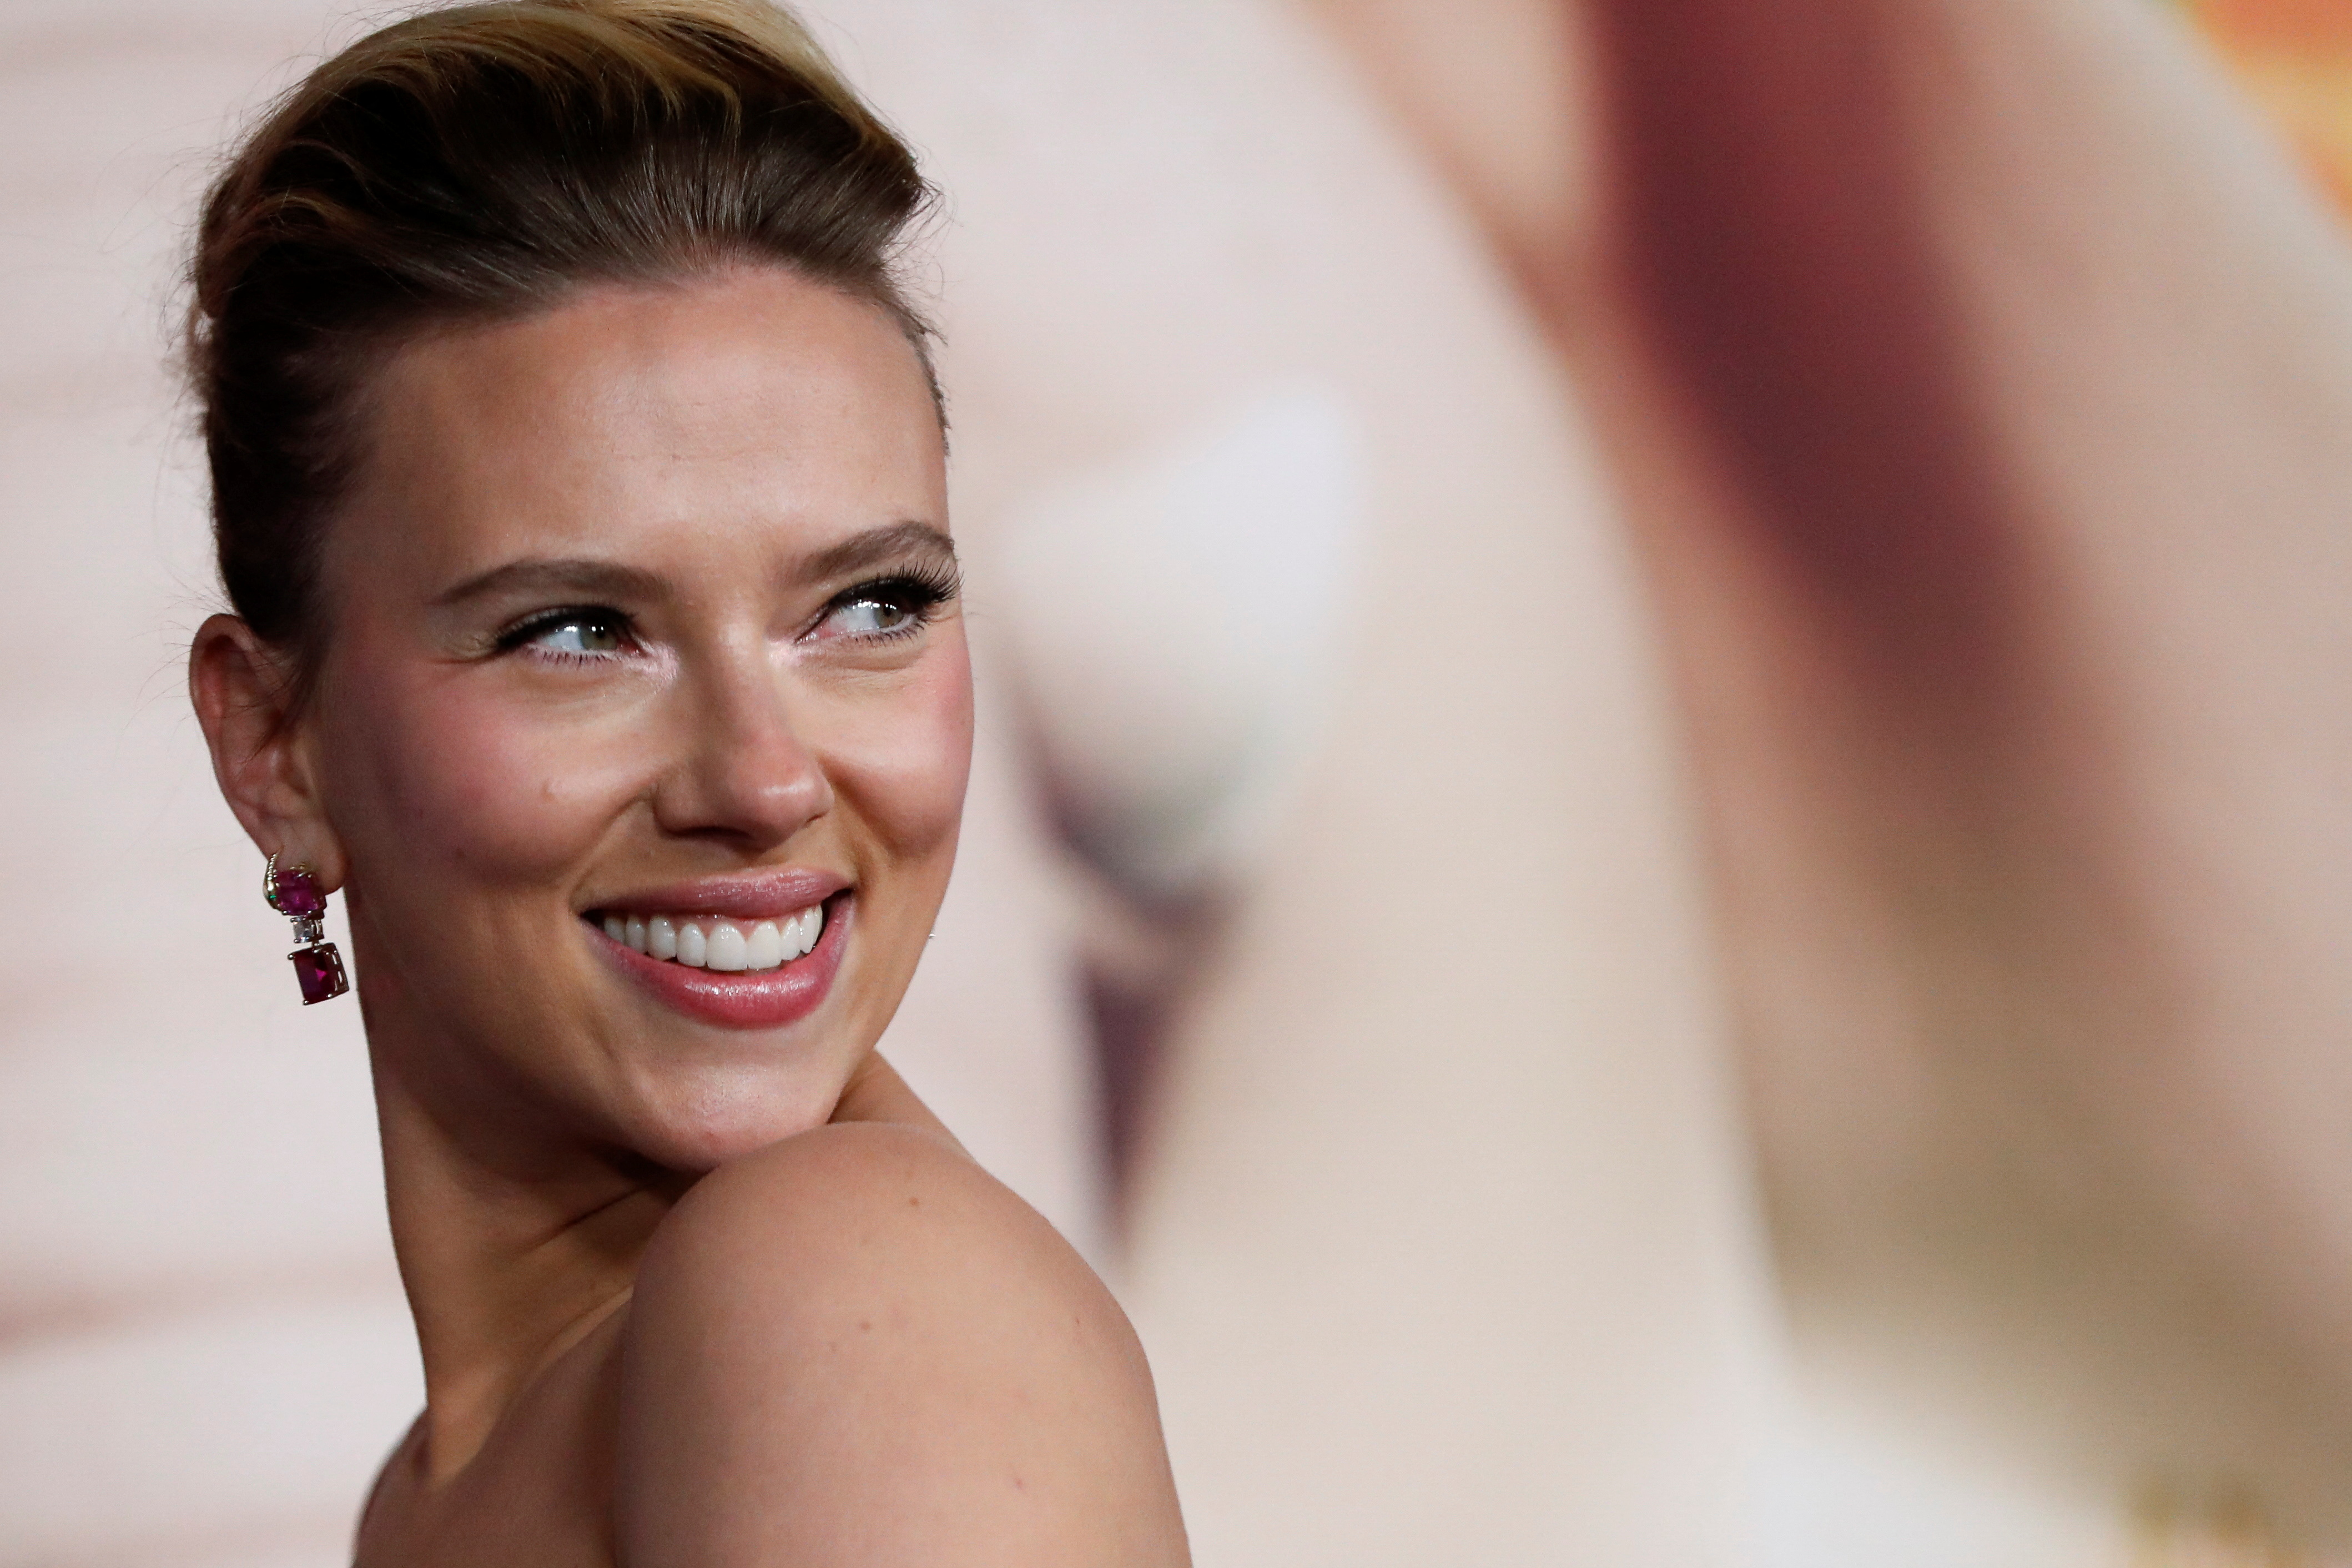 Scarlett Johansson attends the premiere for the film Sing 2 at The Greek Theatre in Los Angeles, California, U.S., December 12, 2021. REUTERS/Mario Anzuoni